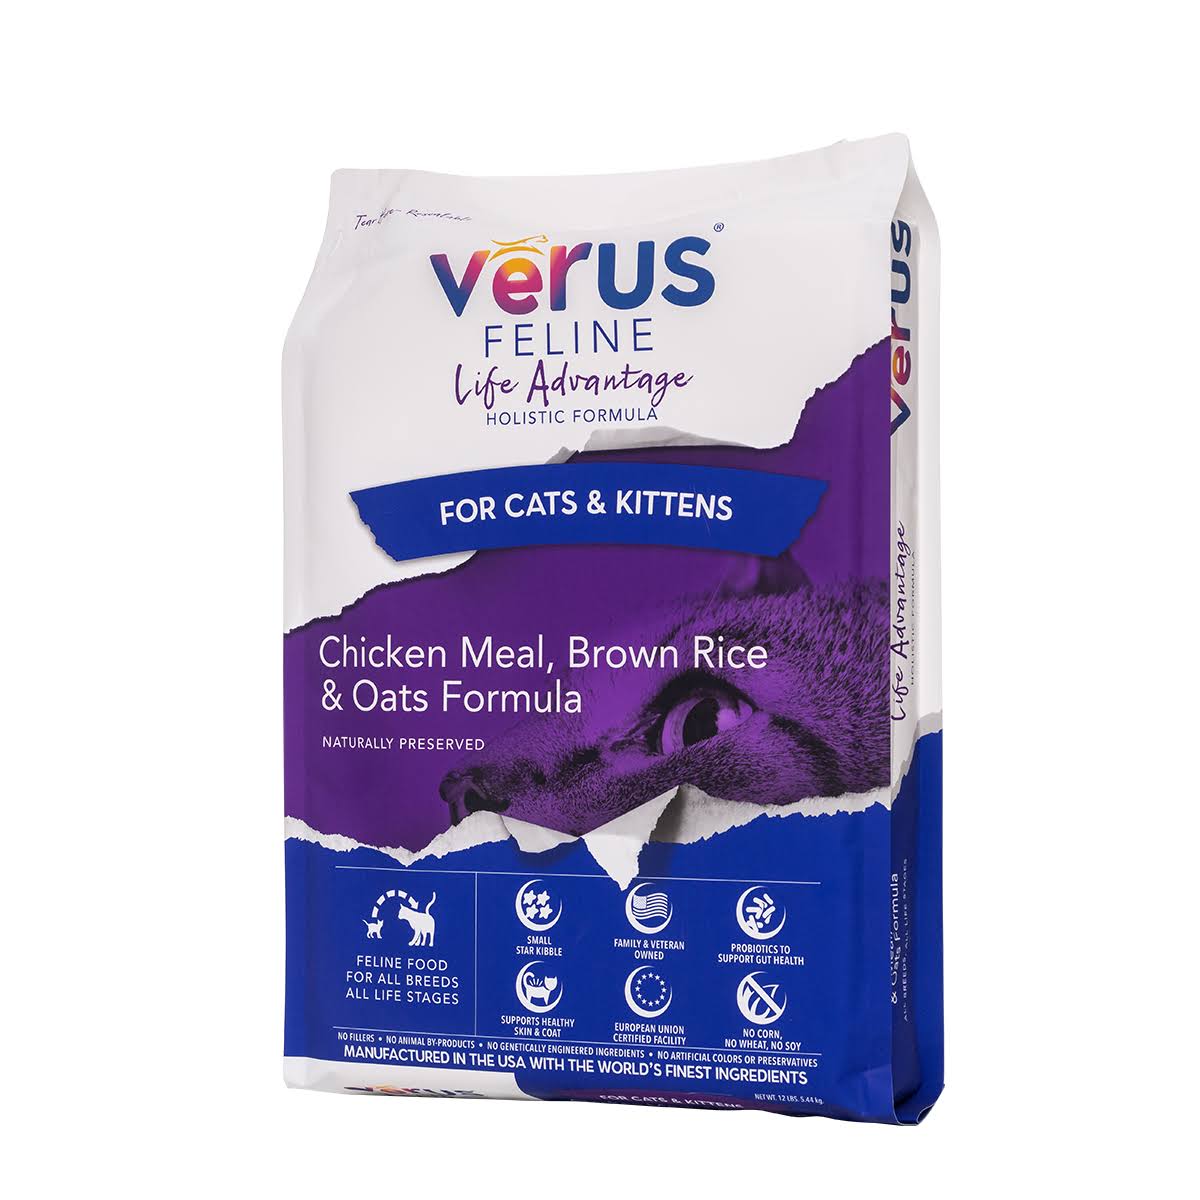 VeRUS Feline Life Advantage Diet Chicken Meal and Brown Rice Formula Dry Cat Food